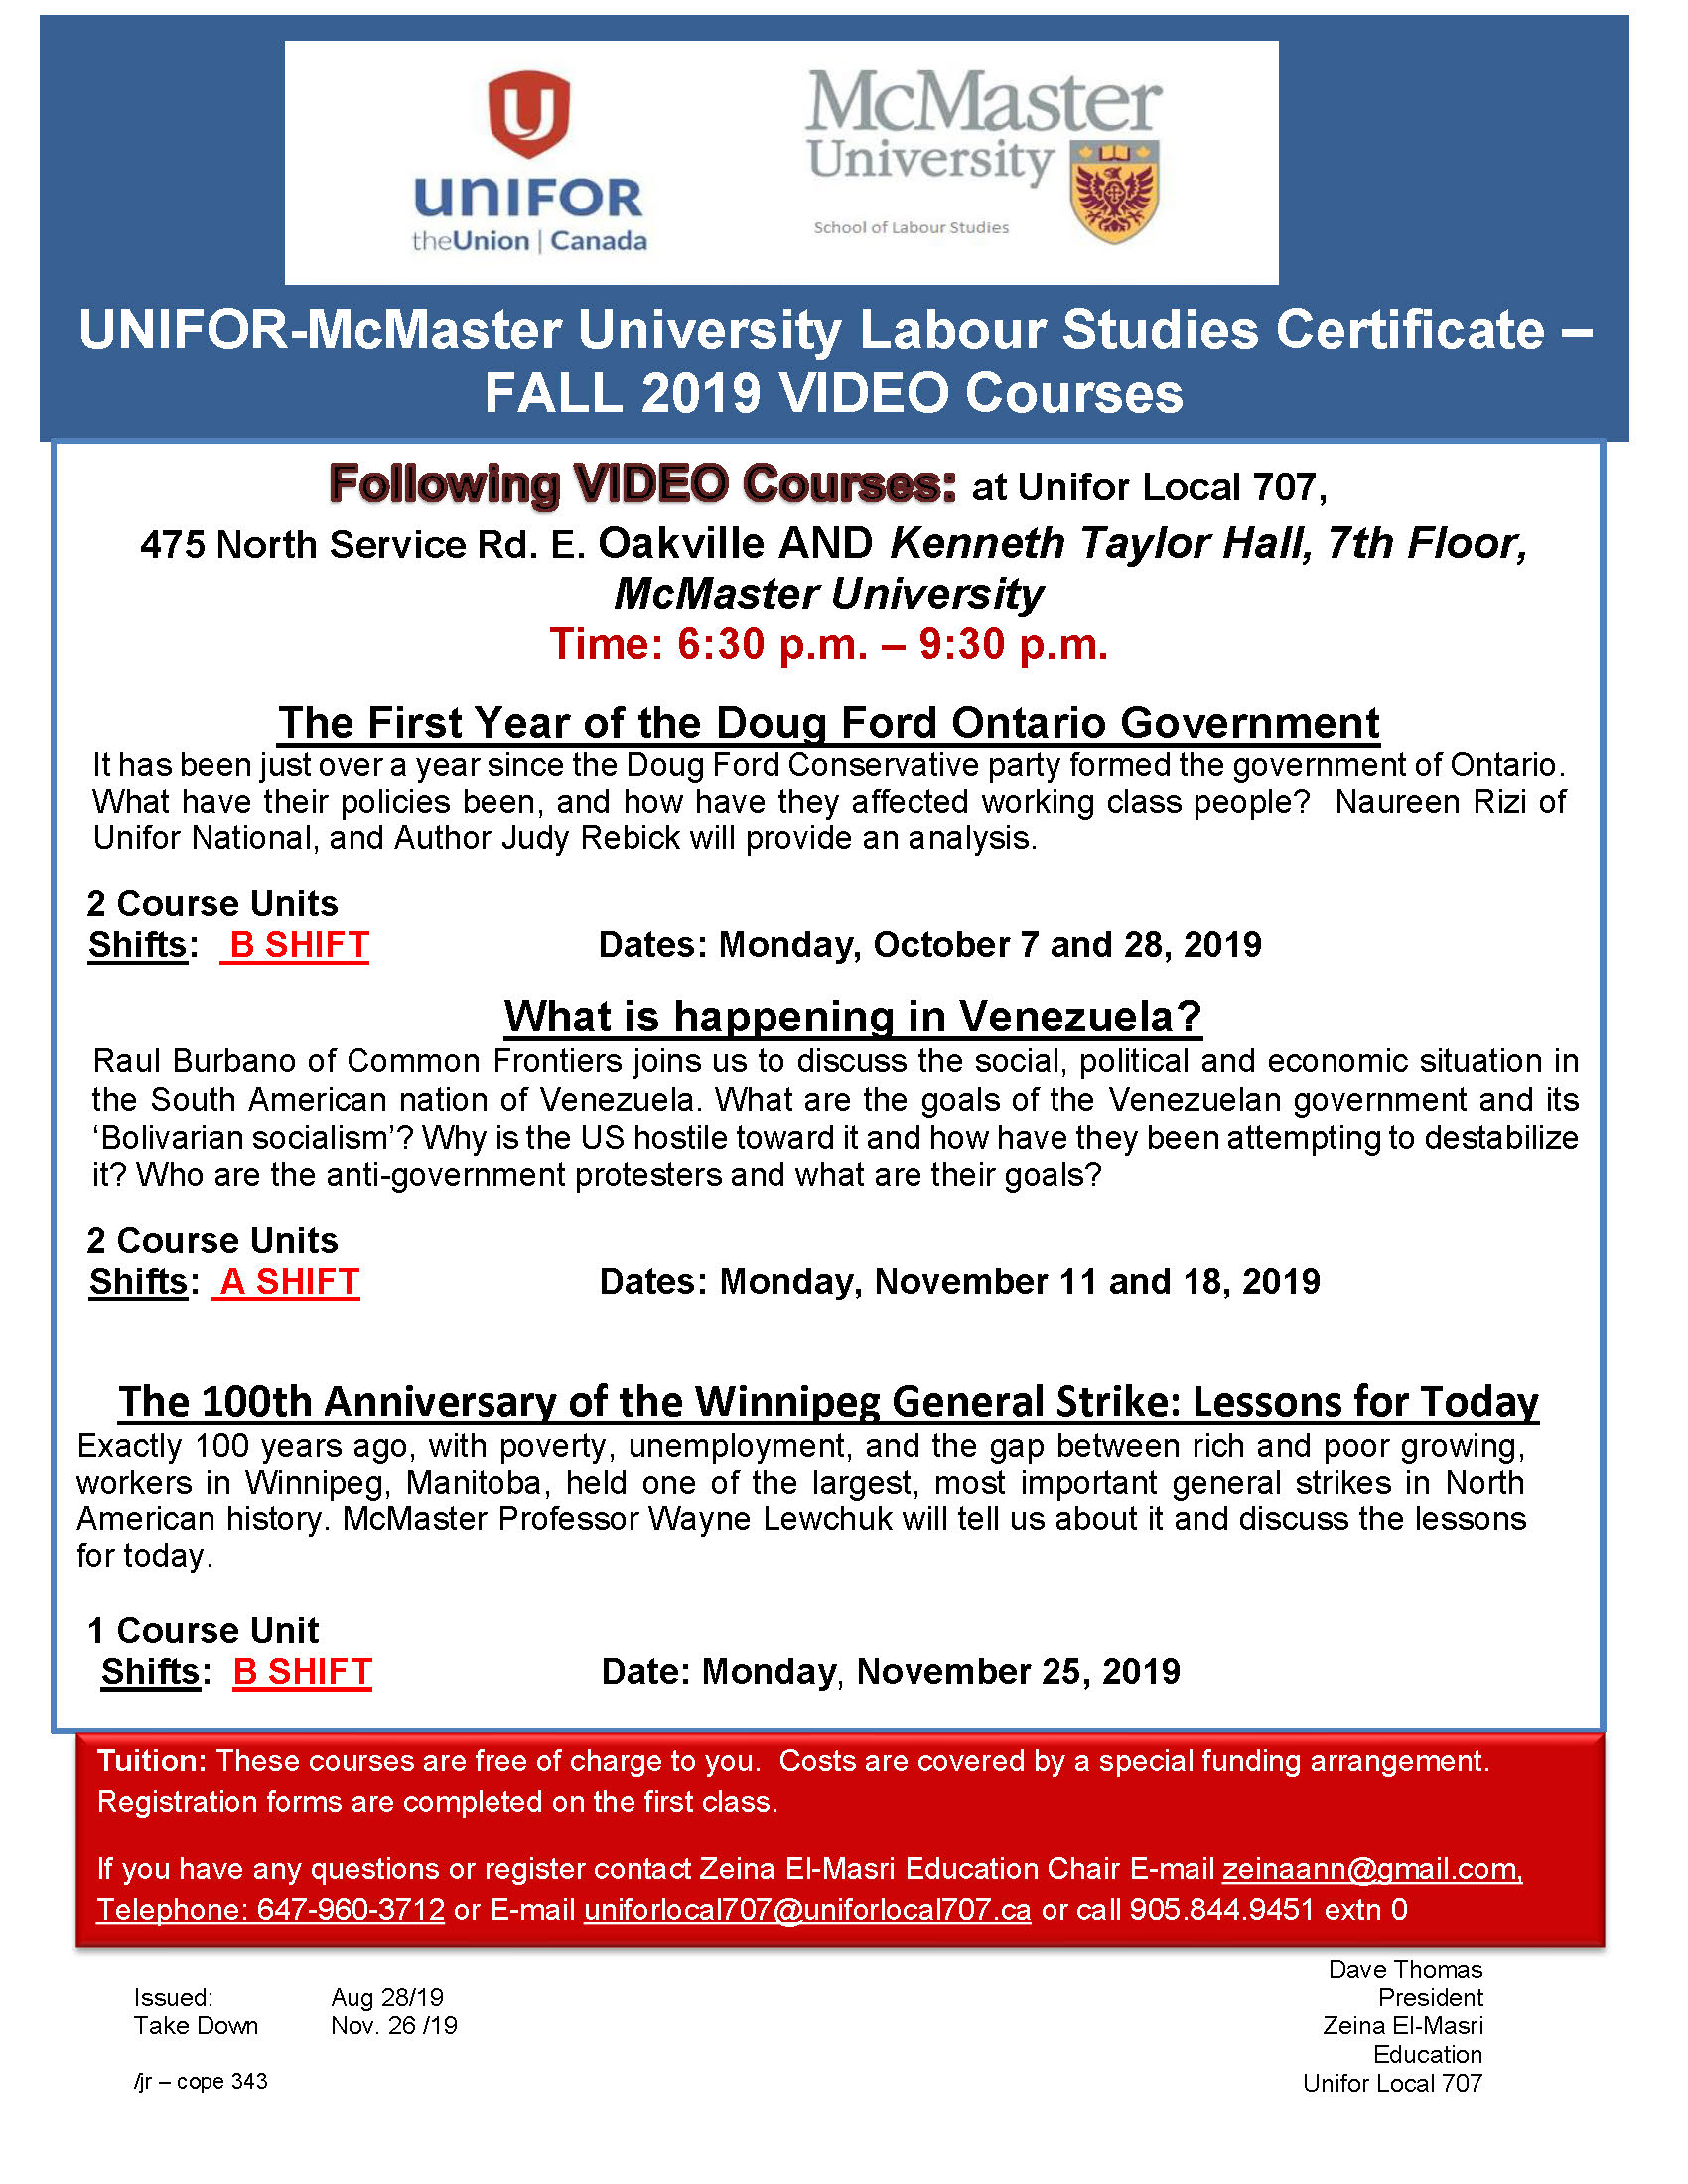 McMaster Studies Certificate FALL 2019 VIDEO Courses at Unifor Local 707